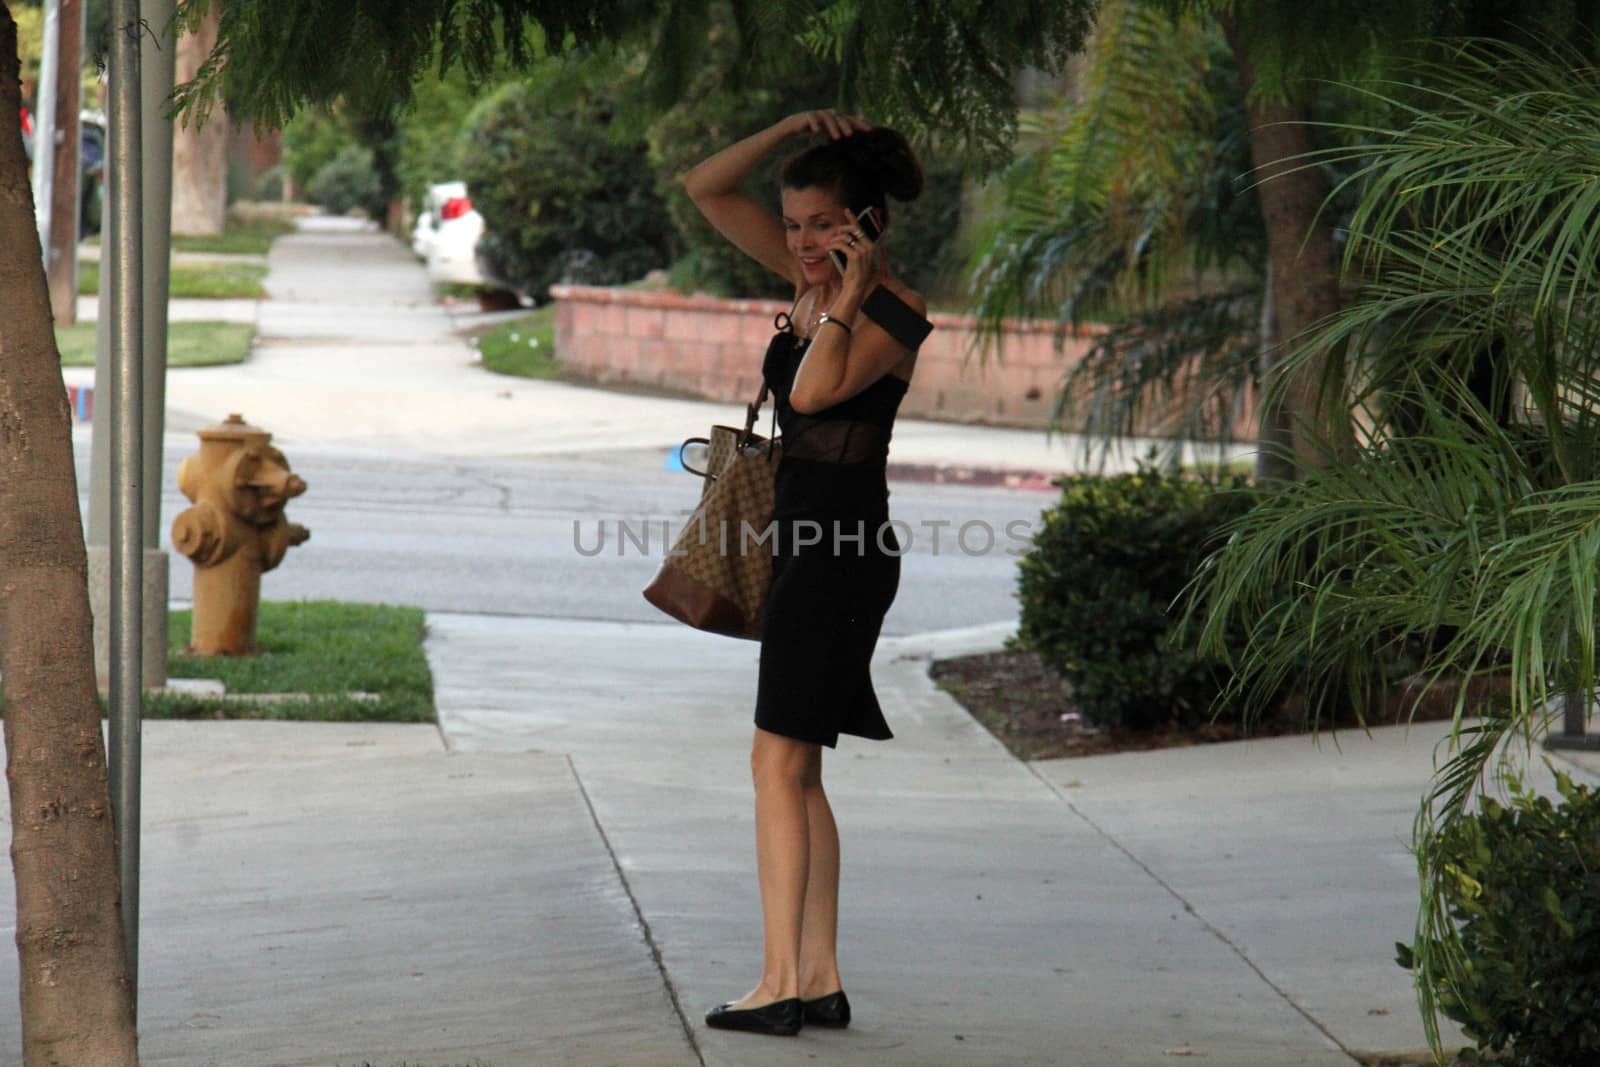 Alicia Arden
star of "Hoarding: Buried Alive," has both a purse malfunction and a wardrobe malfunction while leaving yoga class, Woodland Hills, CA 09-23-15/ImageCollect by ImageCollect